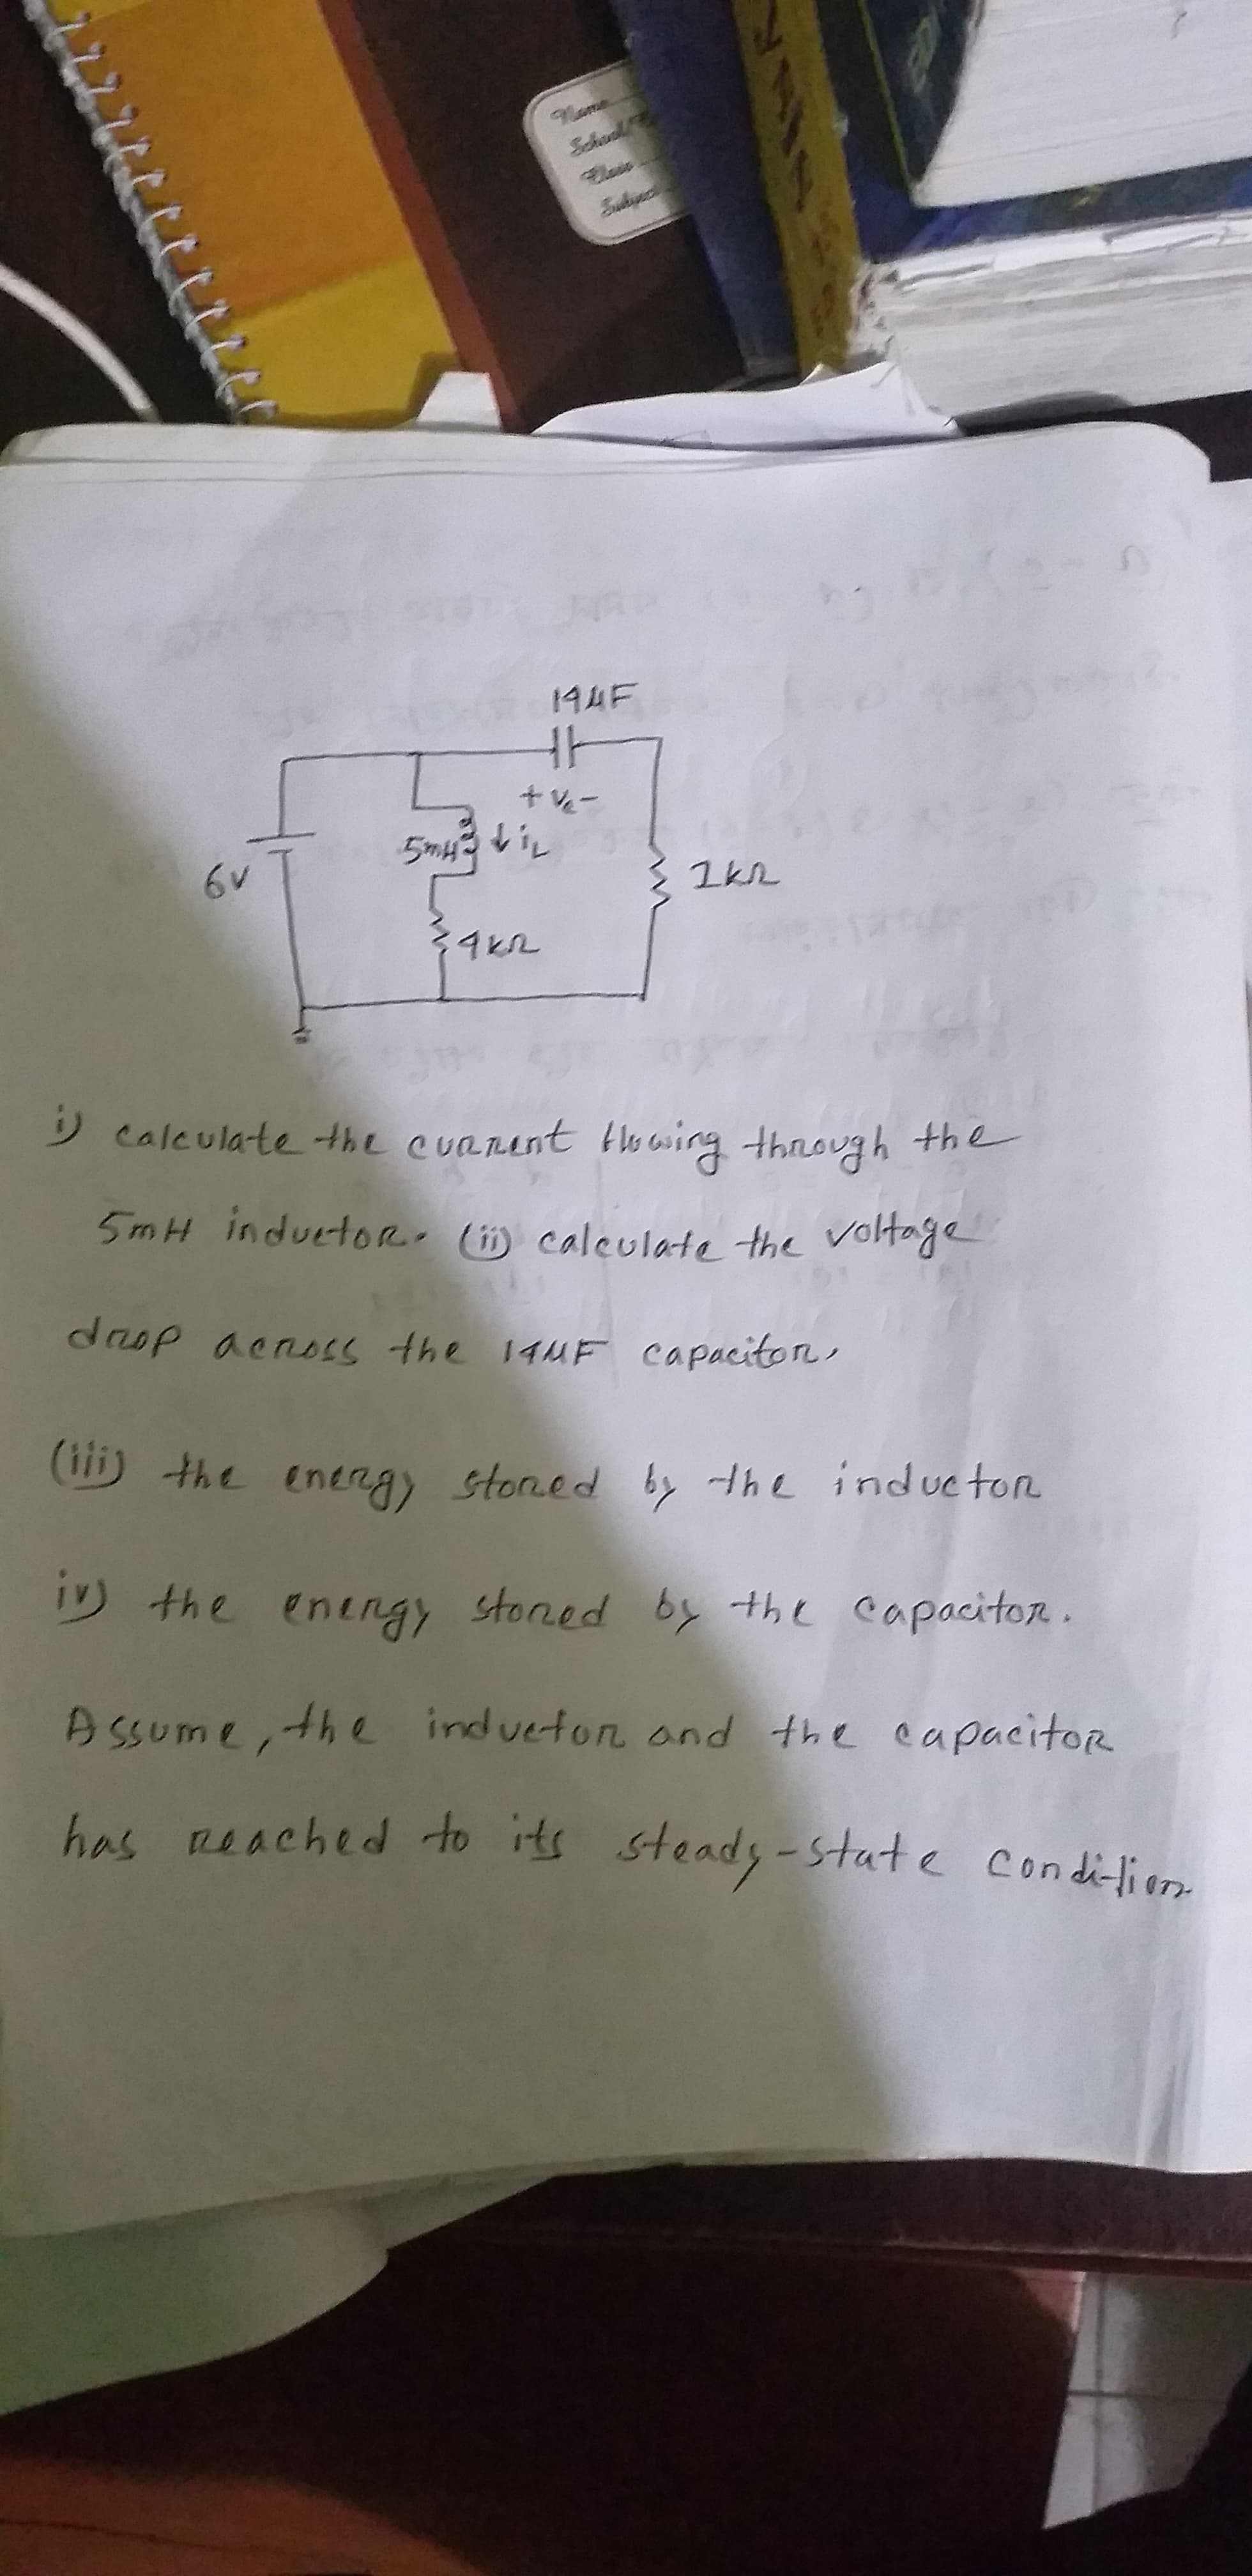 9 calculate the cuanent to cwirg thnough +the
5mH inductoRo () calculate the voltage
() the enengy stoned by the indue ton
the enengy stored
the capacitoR
Assume, the indueton and the eapacitor
